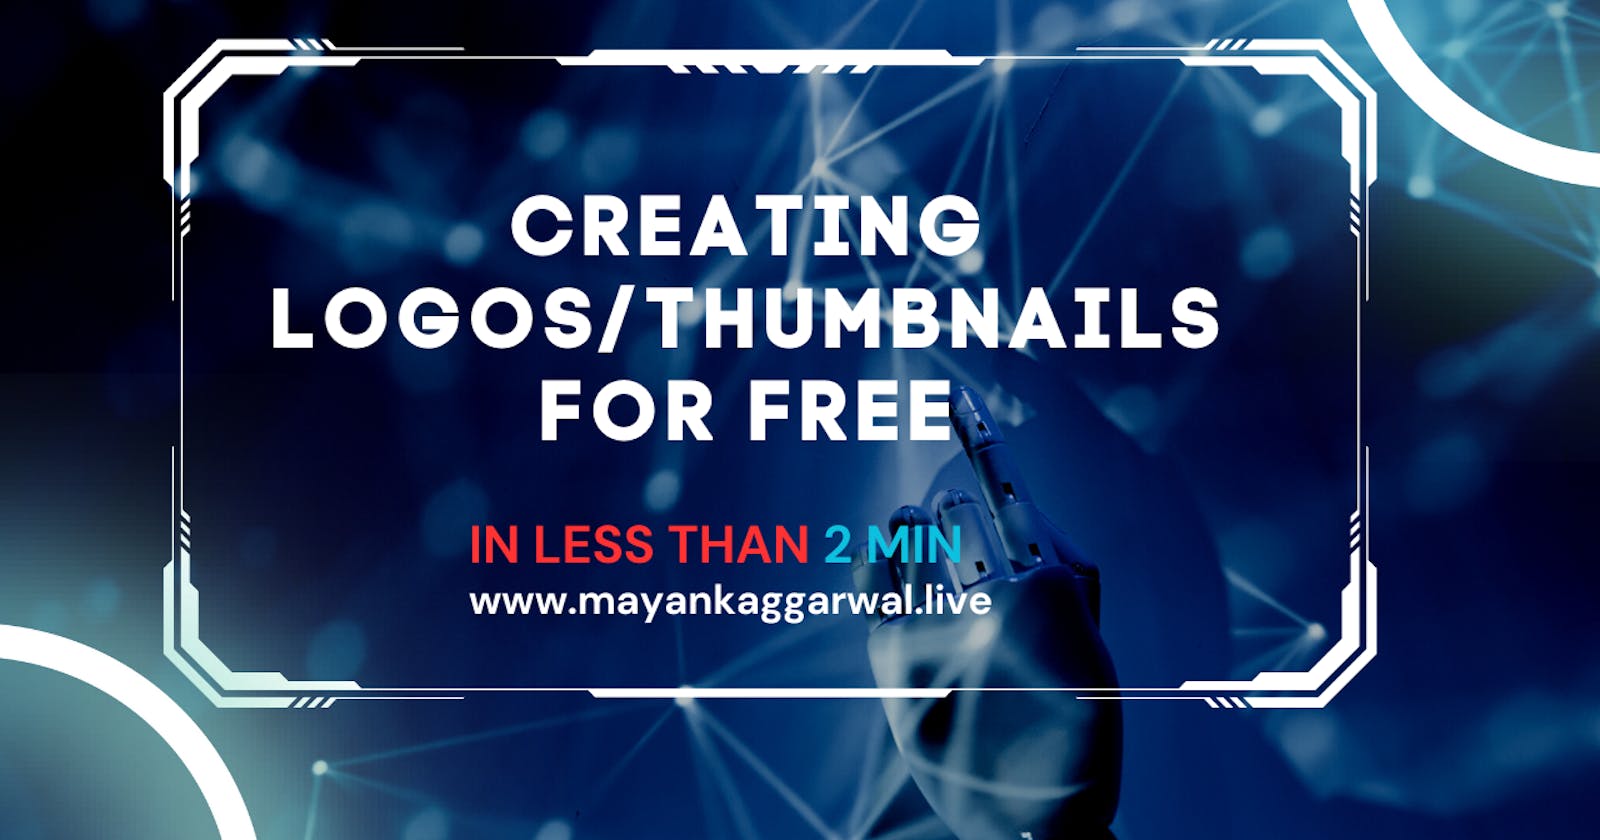 Create Thumbnails/logos in 2 min for Free!!